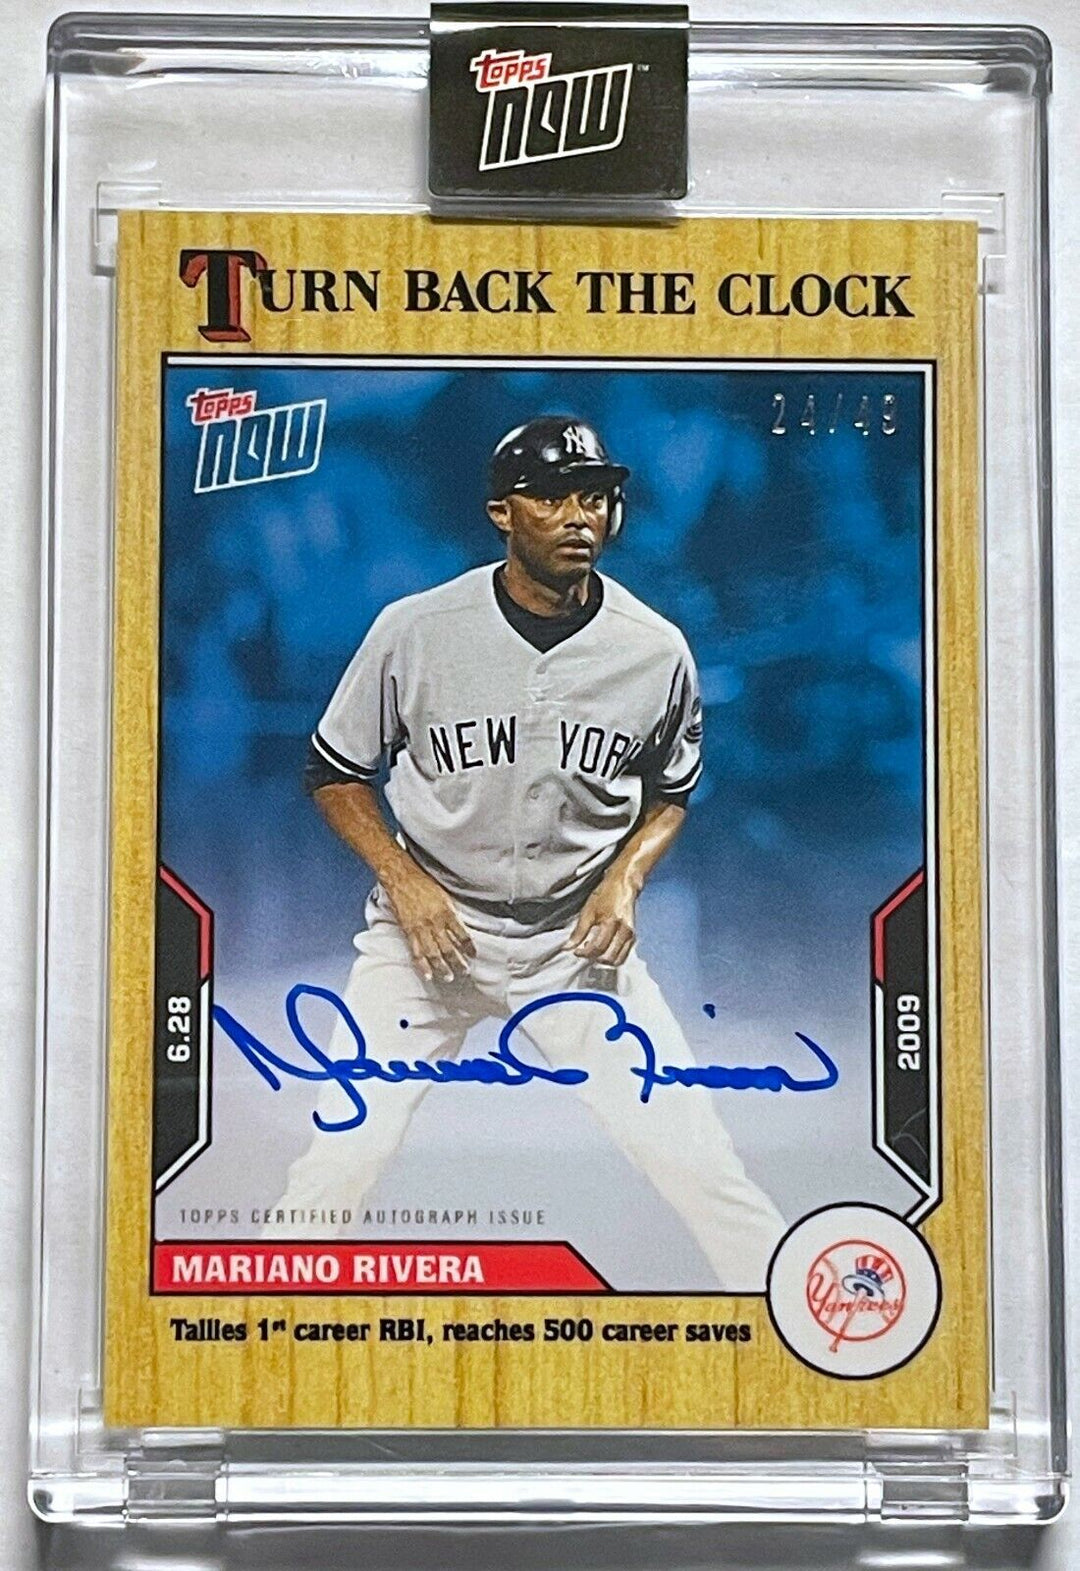 MARIANO RIVERA SIGNED 1st RBI 500 SAVES TOPPS TURN BACK THE CLOCK AUTO CARD #89A Image 3